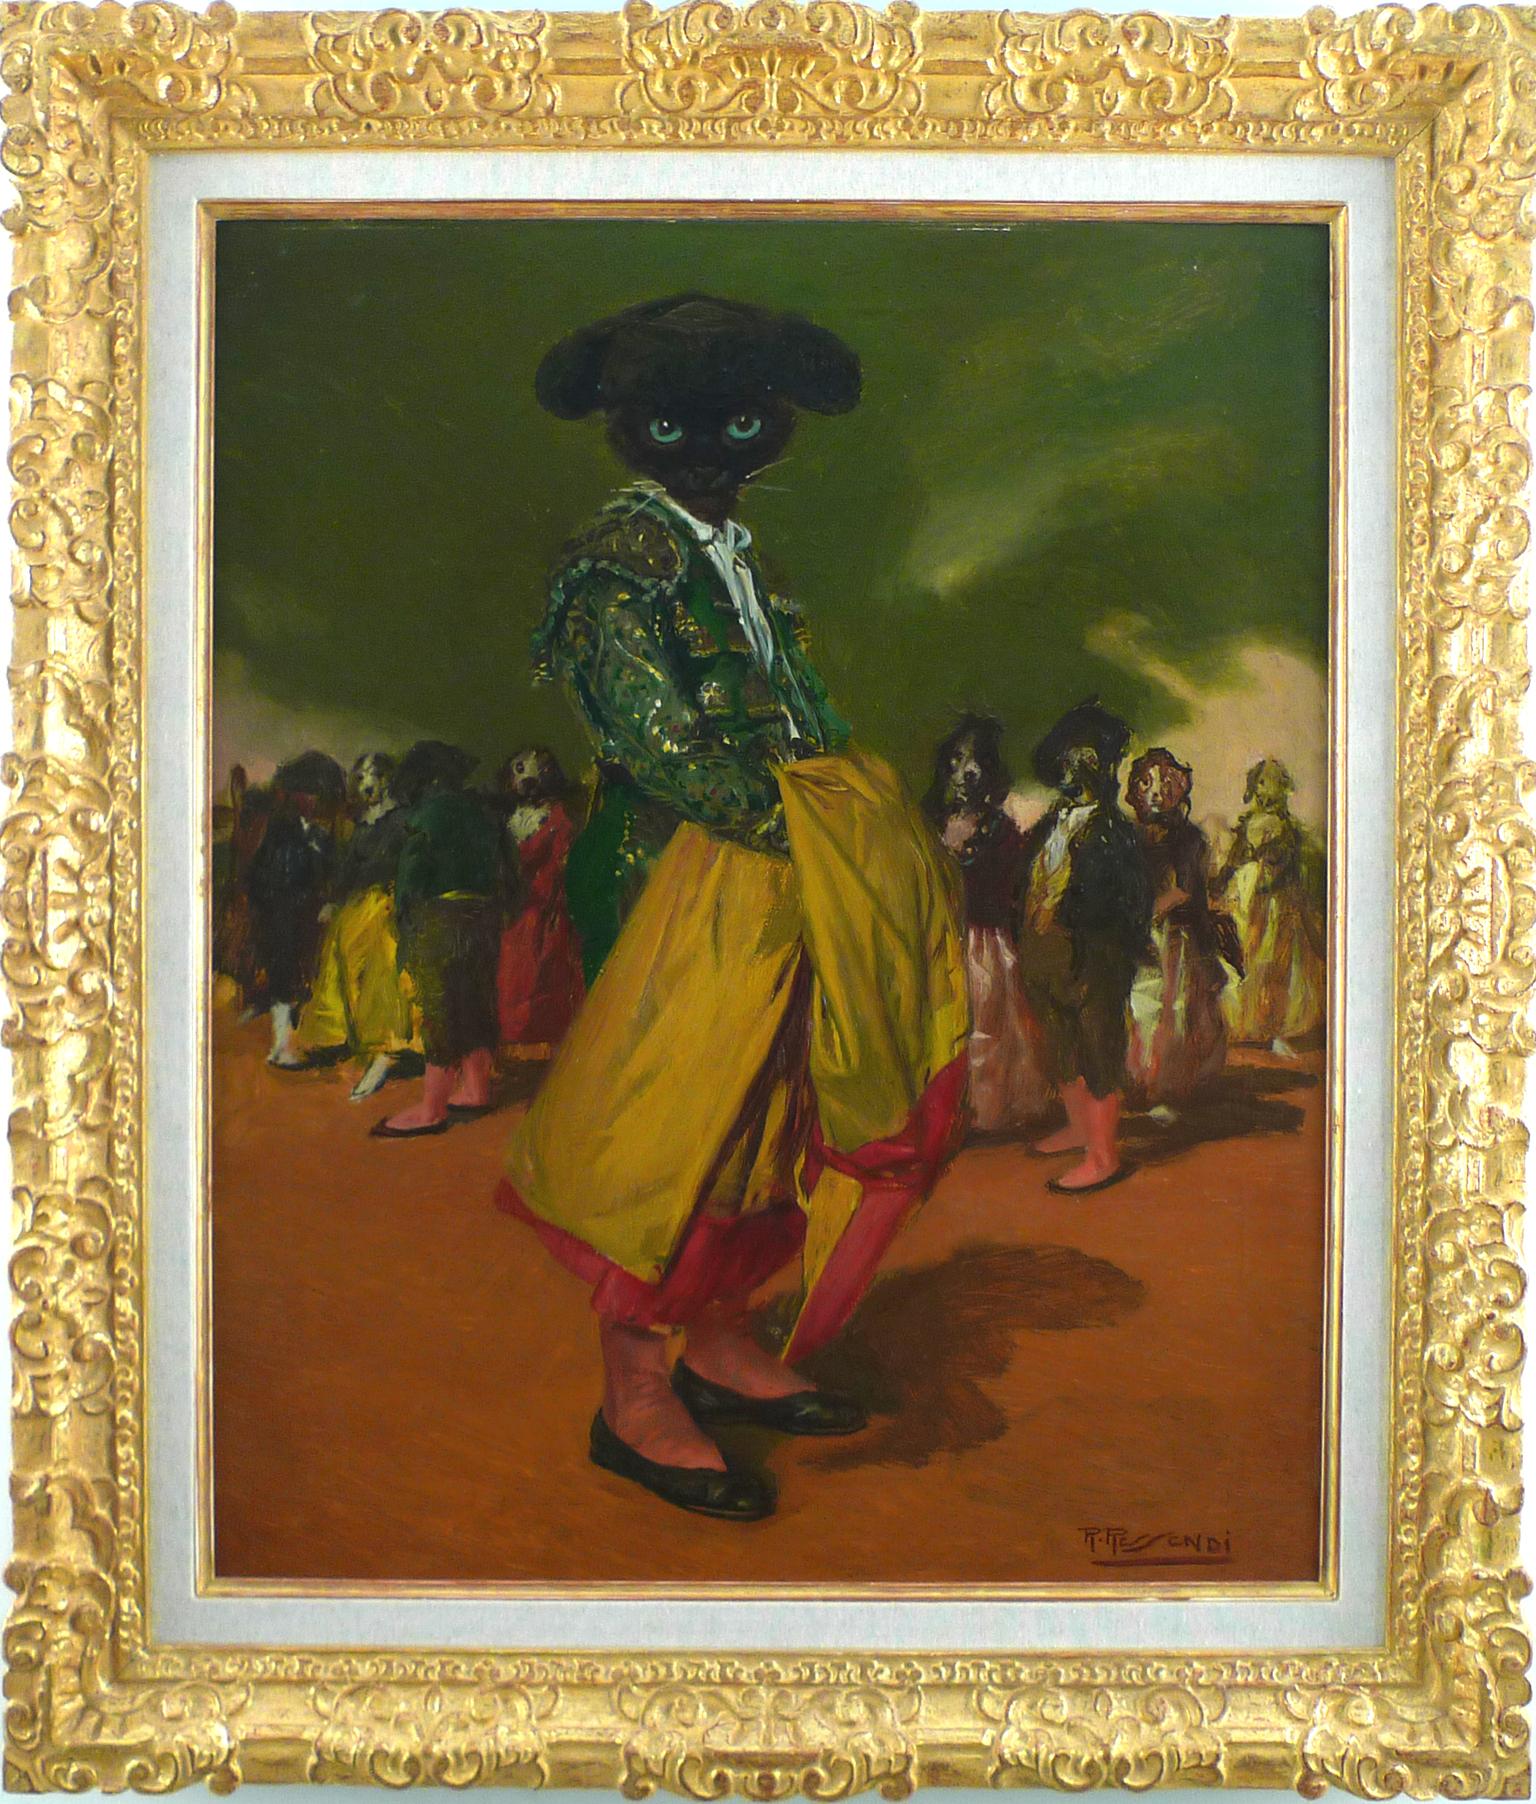 Baldomero Ressendi Animal Painting - "The Bullfighter", 20th C. Oil on Canvas, A Male Cat Dressed Up as a Bullfighter